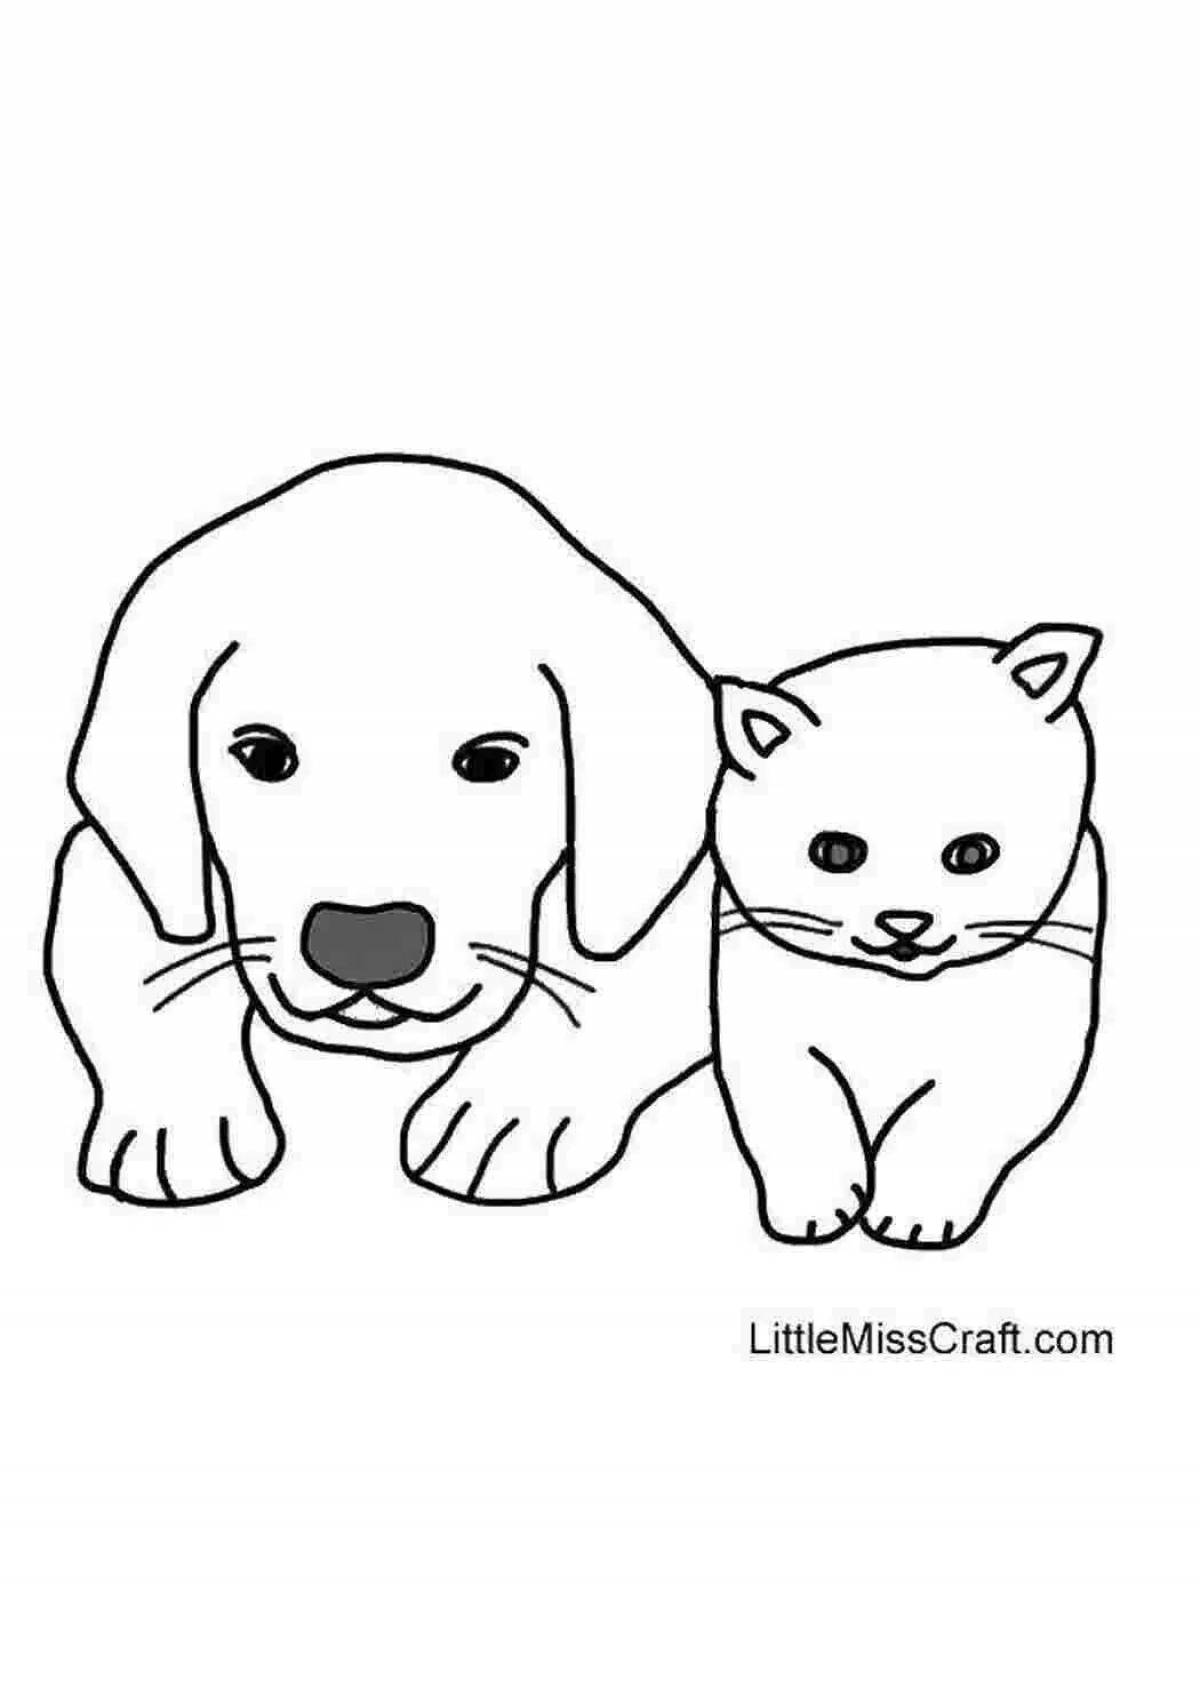 Crazy cat and dog coloring book for kids